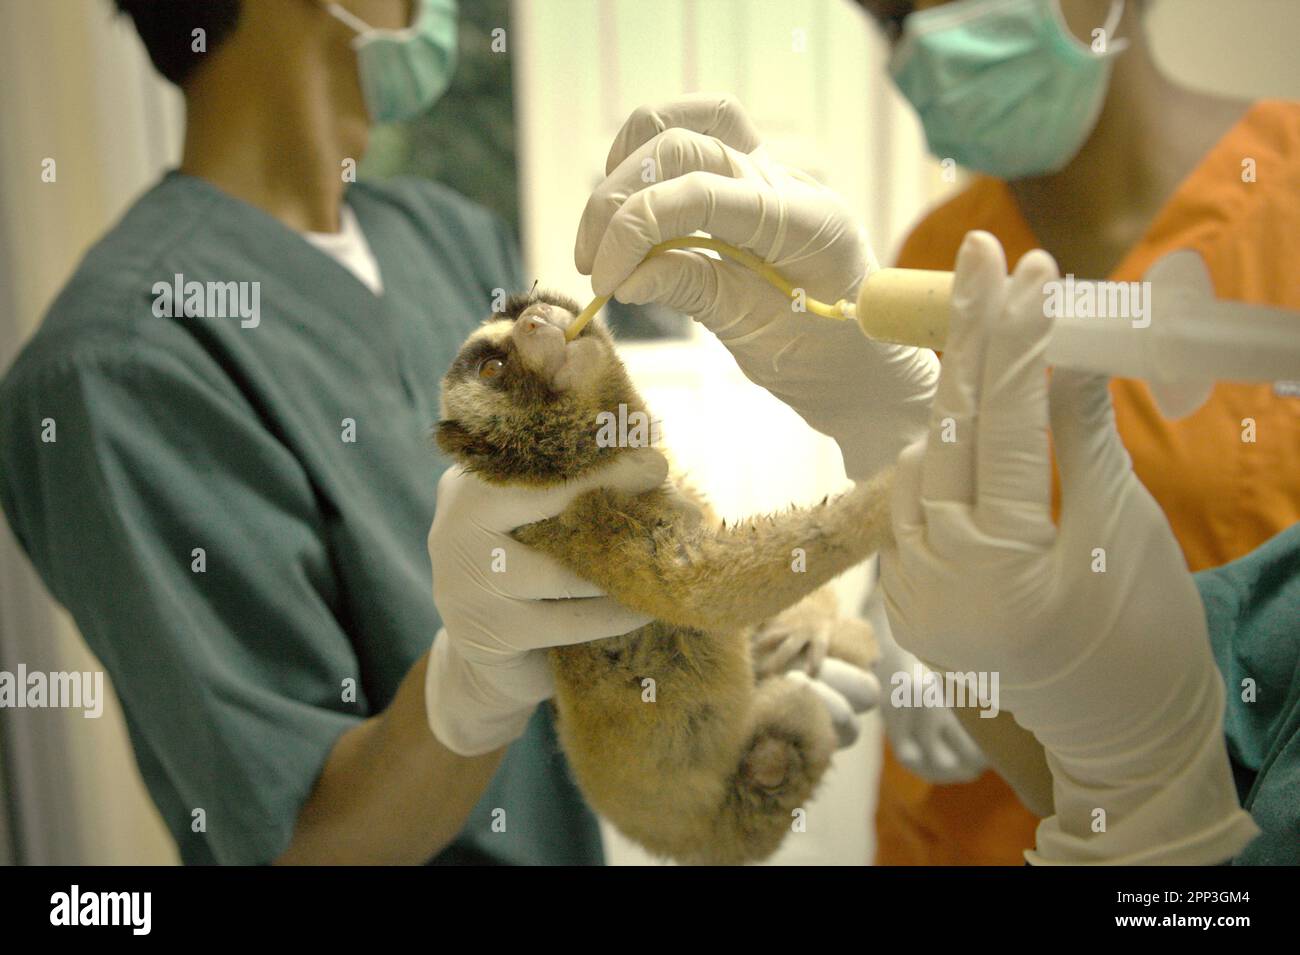 A team of veterinarians led by Sharmini Julita Paramasivam is giving a medical treatment to a slow loris that were rescued from wildlife trade, at a veterinary facility operated by International Animal Rescue (IAR) in Ciapus, Bogor, West Java, Indonesia. Despite its protection, slow loris has been suffering from wildlife trade. The nocturnal primate species is treated as pet while not having characteristics to survive in anthropogenic settings. Moreover, the species is quite popular on social media. Stock Photo